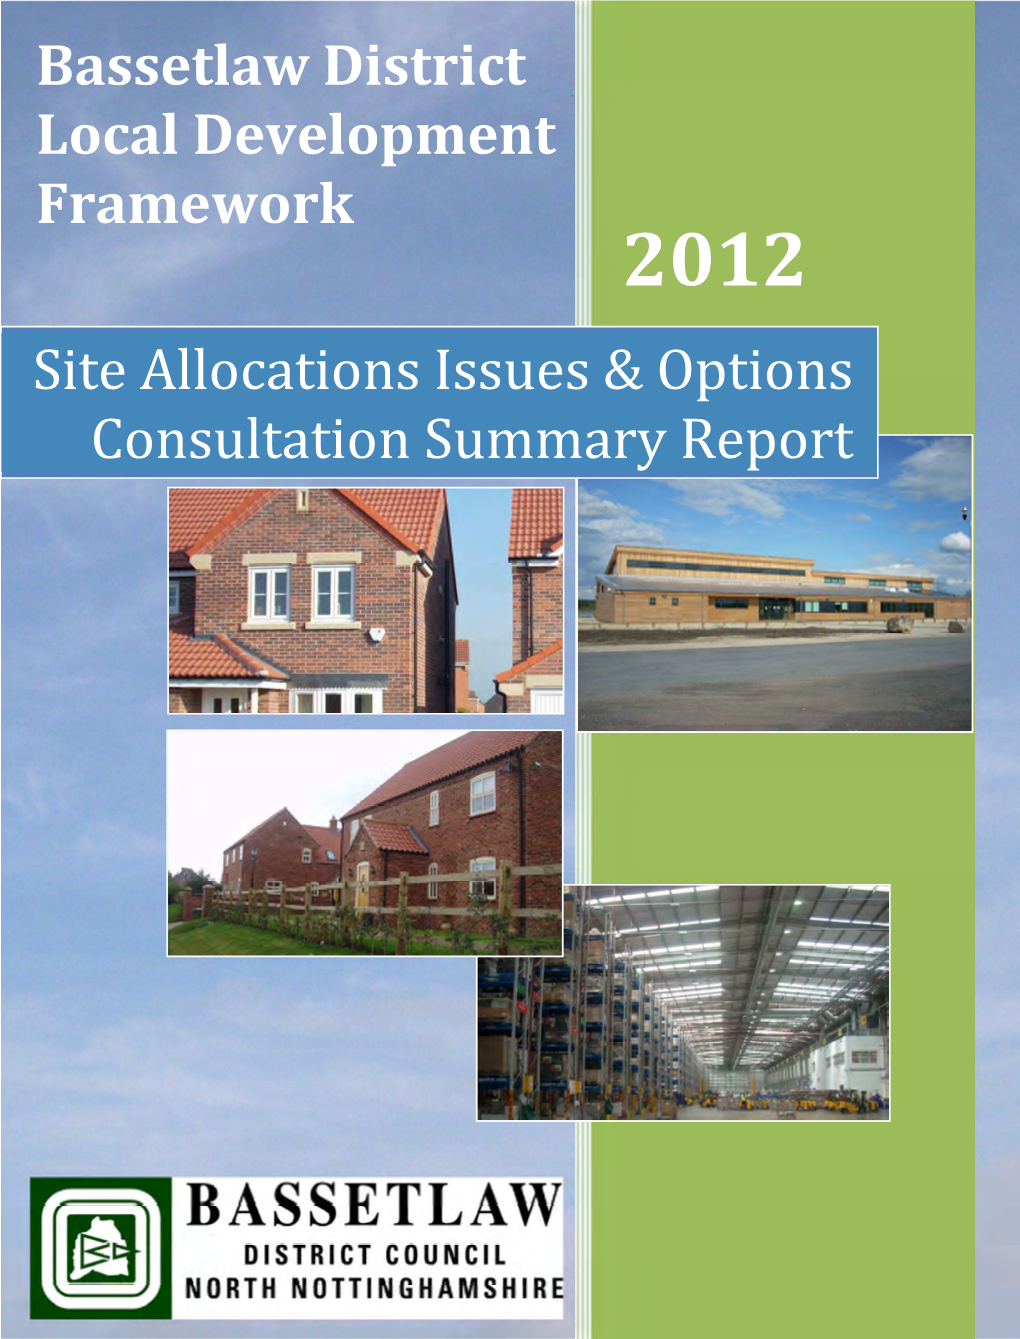 Bassetlaw District Local Development Framework Site Allocations Issues